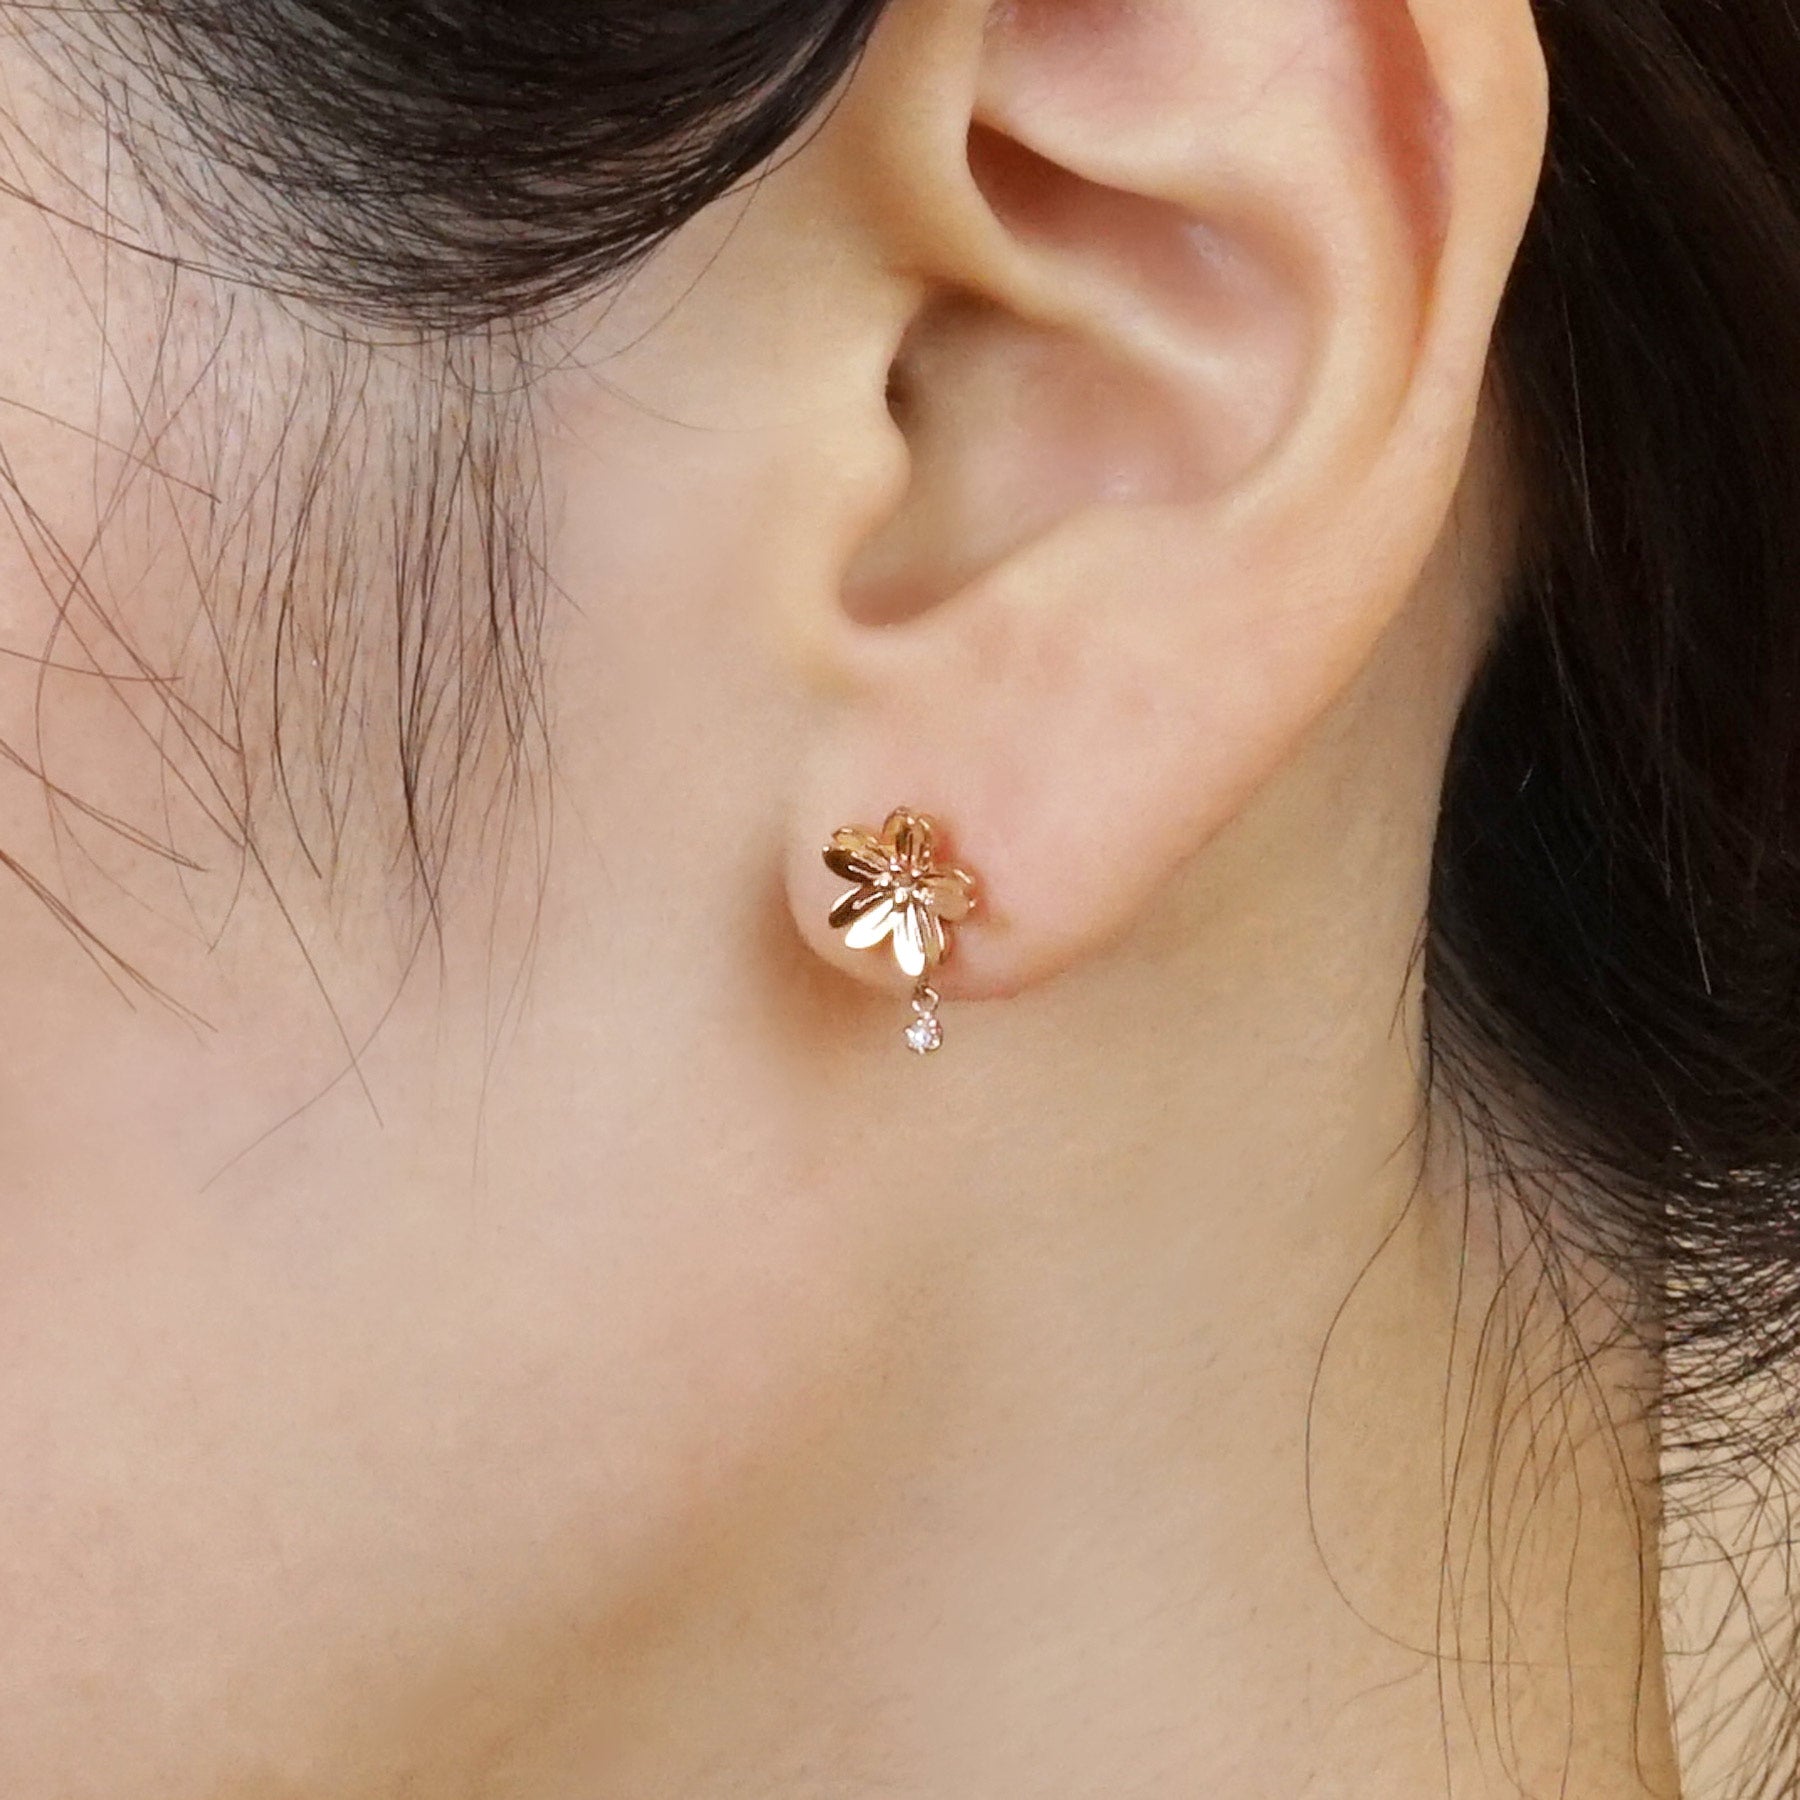 [Birth Flower Jewelry] April - Cherry Blossoms Earrings (925 Sterling Silver / 18K) - Model Image